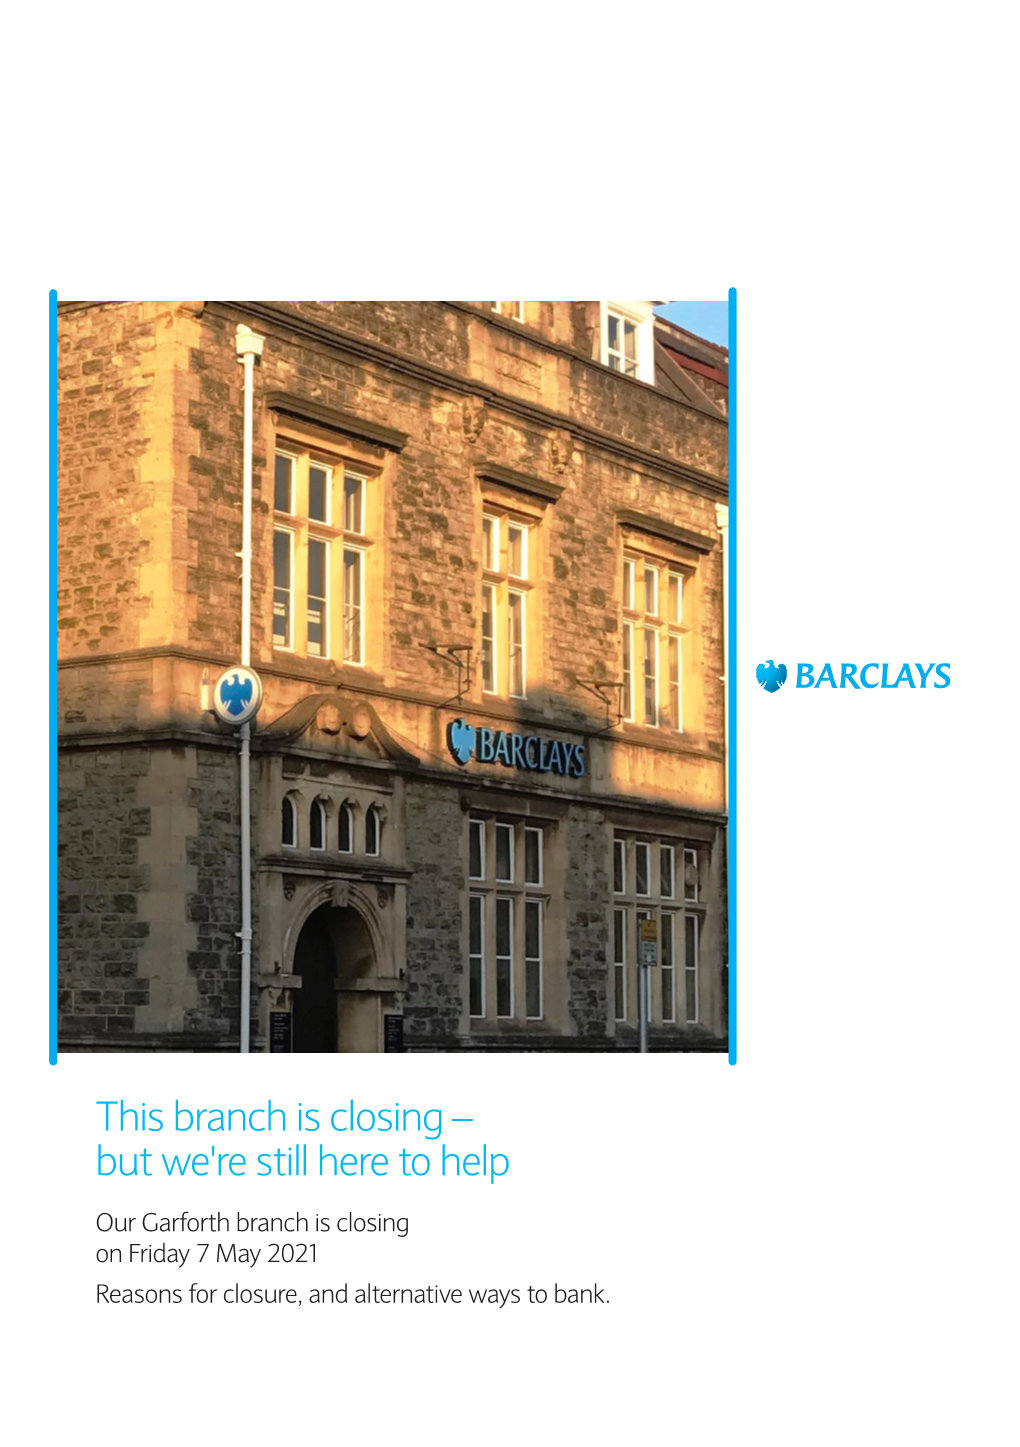 Garforth Branch Is Closing on Friday 7 May 2021 Reasons for Closure, and Alternative Ways to Bank